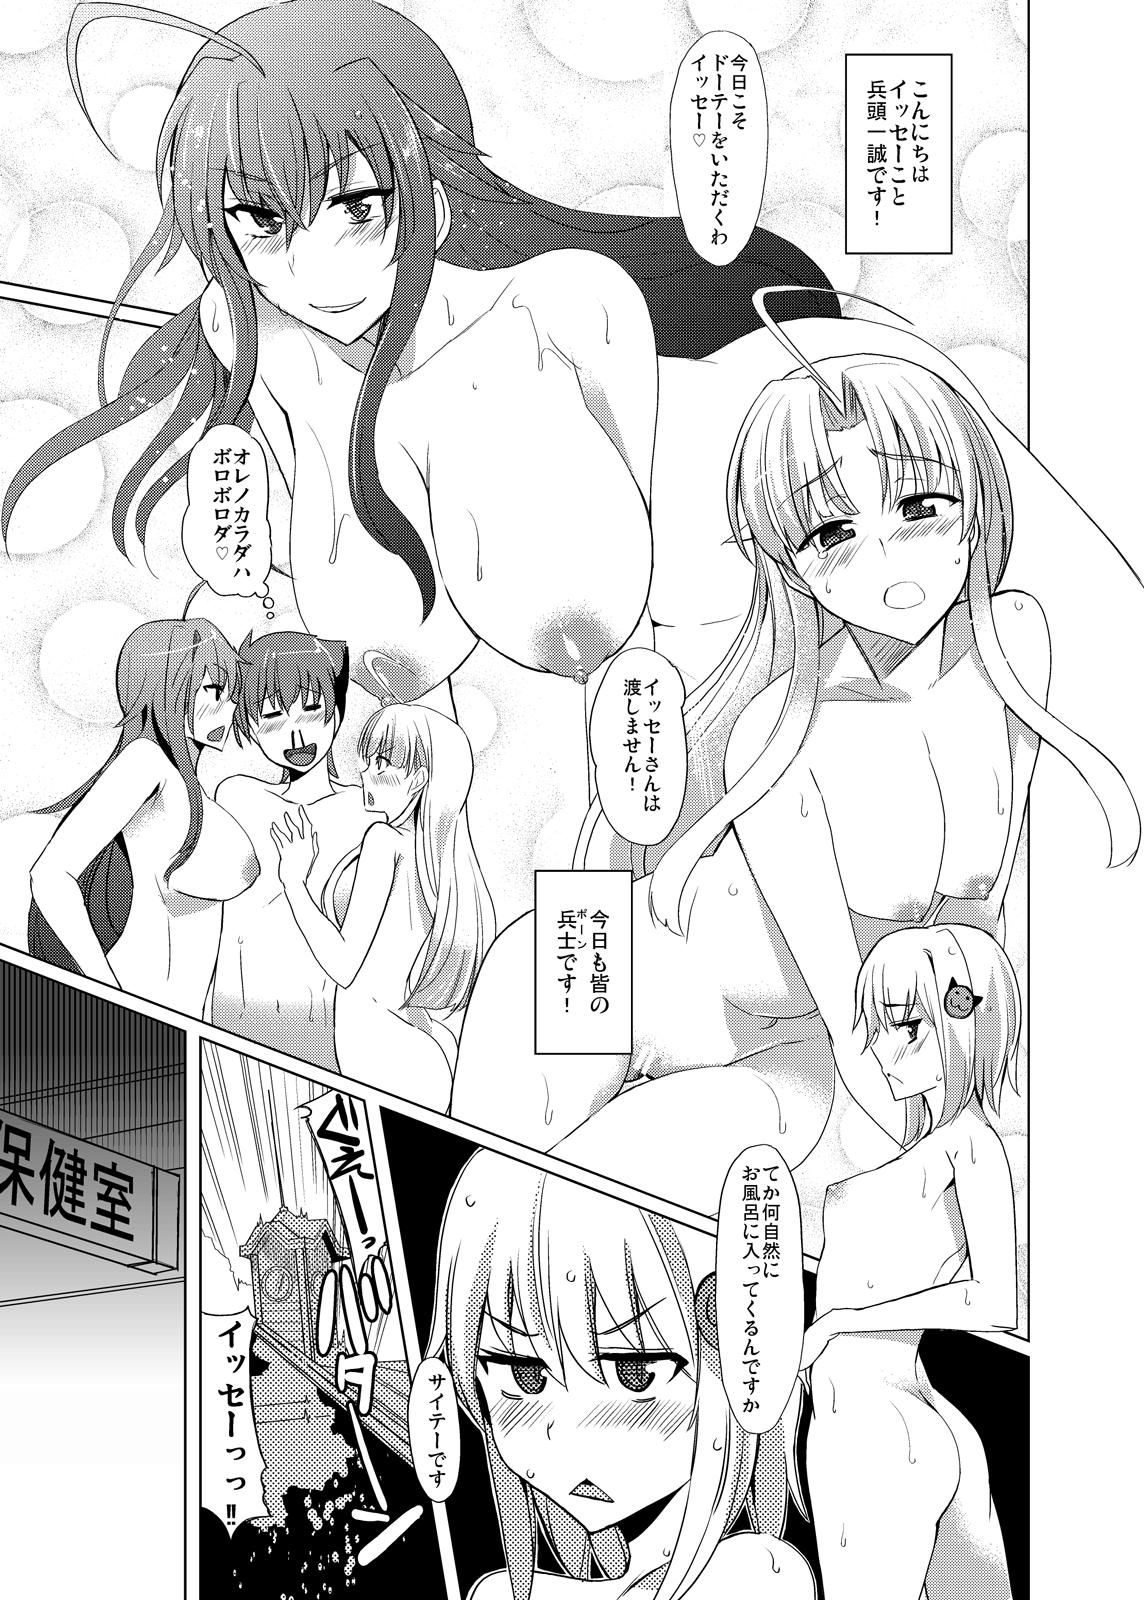 Bald Pussy Akeno-san to DxD - Highschool dxd Nipples - Page 3